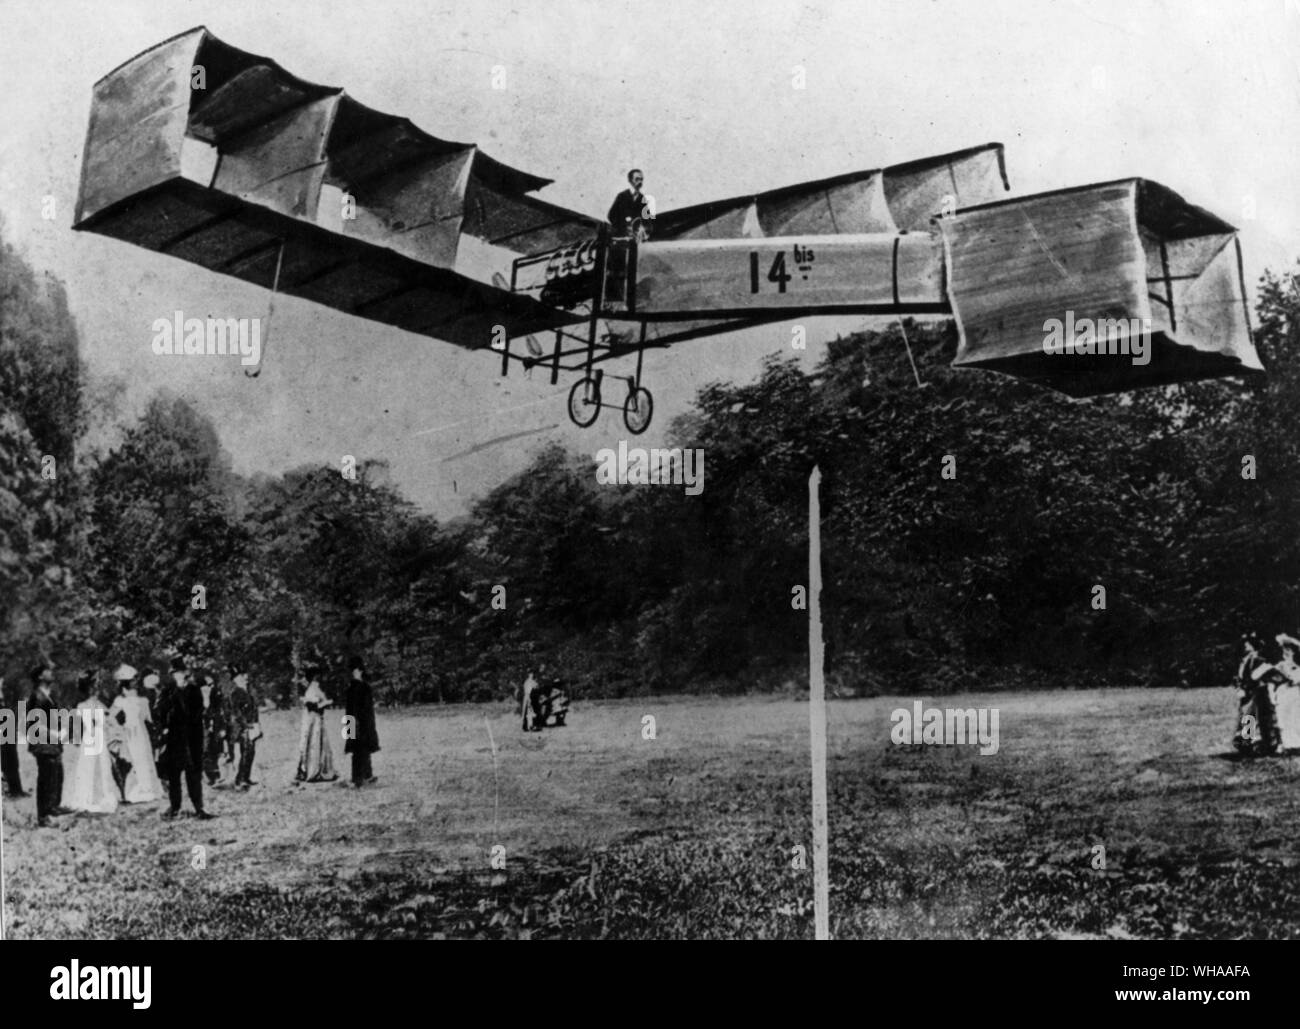 Santos Dumont the first man to fly, during his famous flight when a machine heavier than the air left the ground for the first time in history at Bagatelle in Paris in 1906 Stock Photo